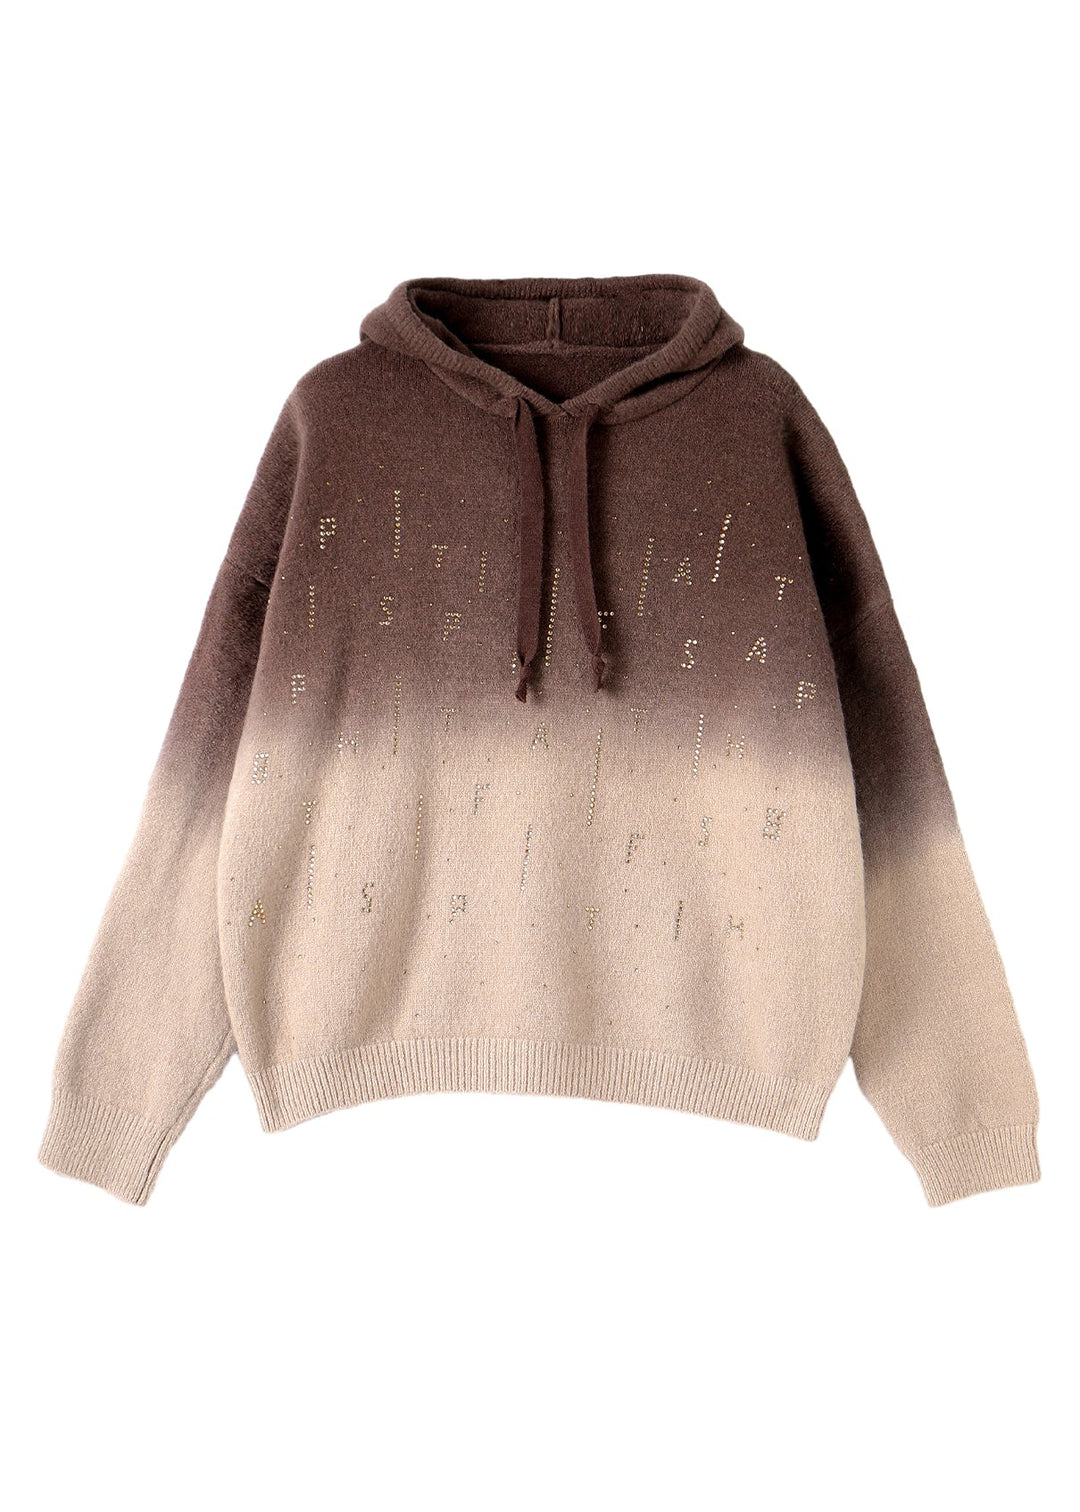 Casual Khaki Hooded Gradient Color Knit Sweatshirts Top Winter